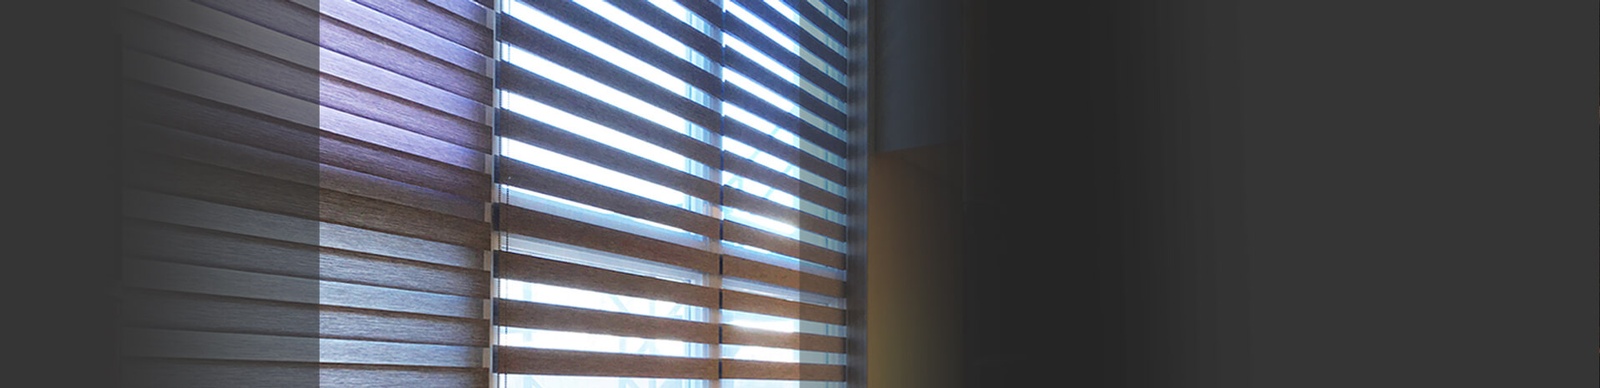 With our custom blinds in Edmonton, you can make your house or office look more stylish.